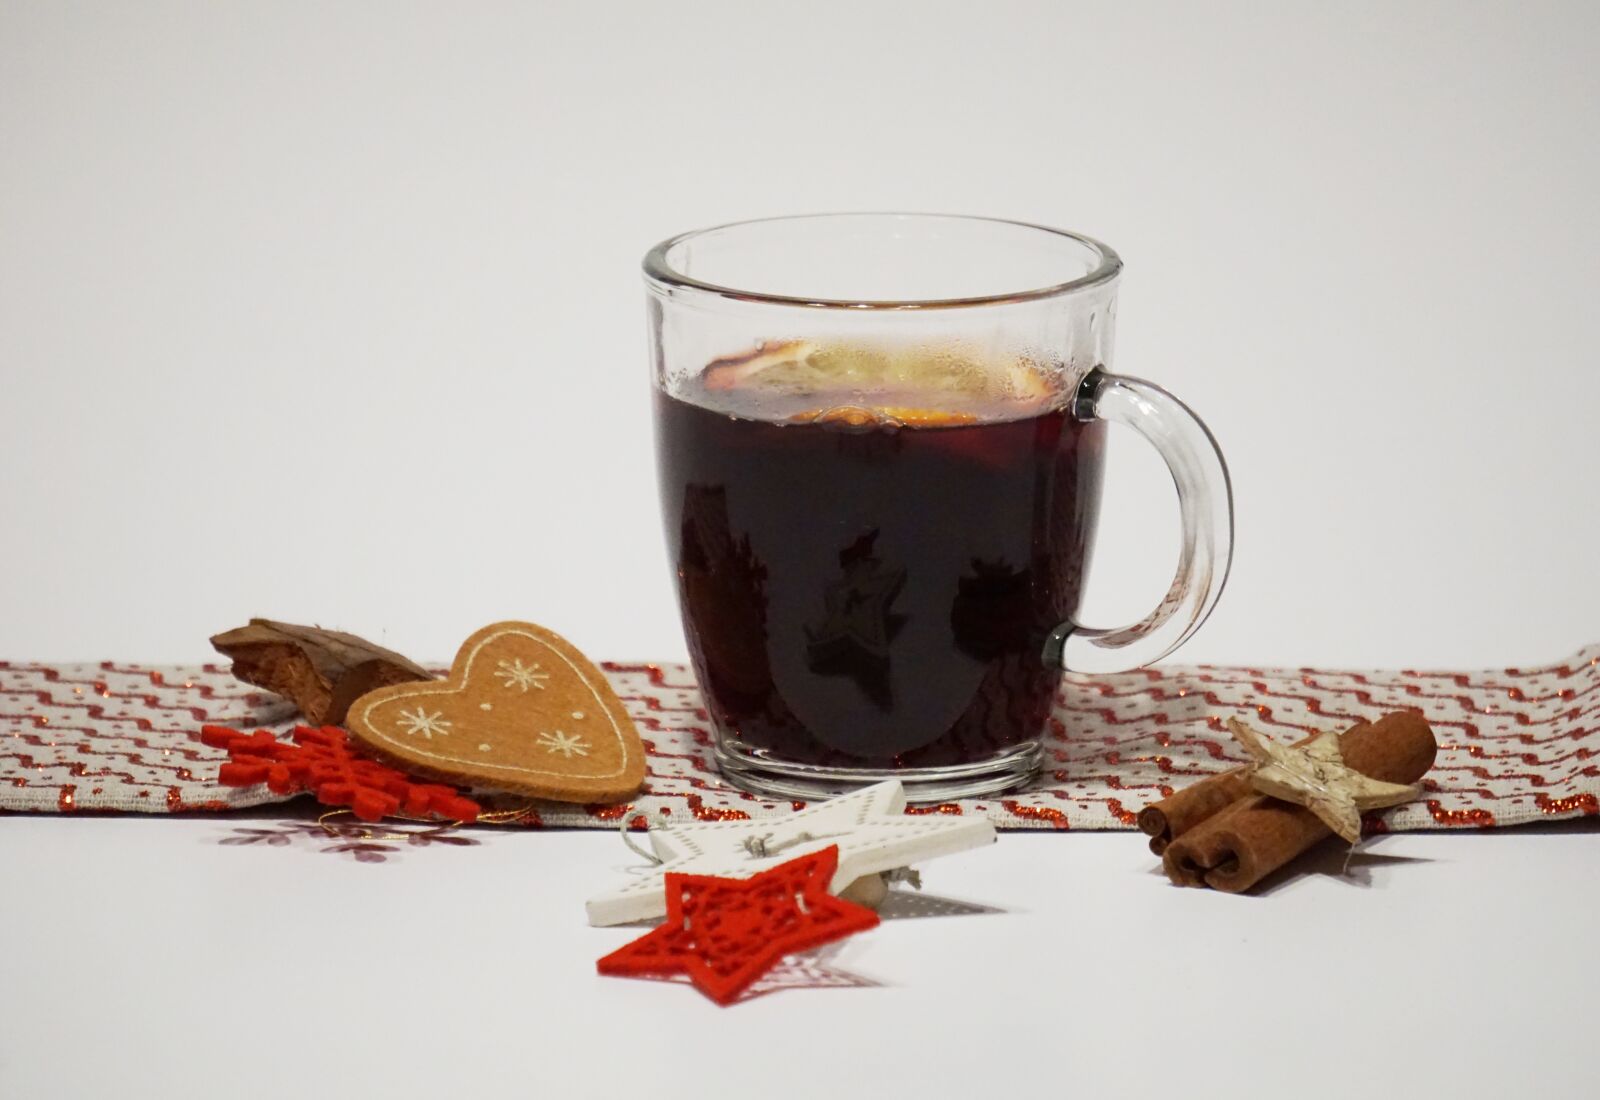 Sony a6000 sample photo. Mulled claret, christmas, winter photography